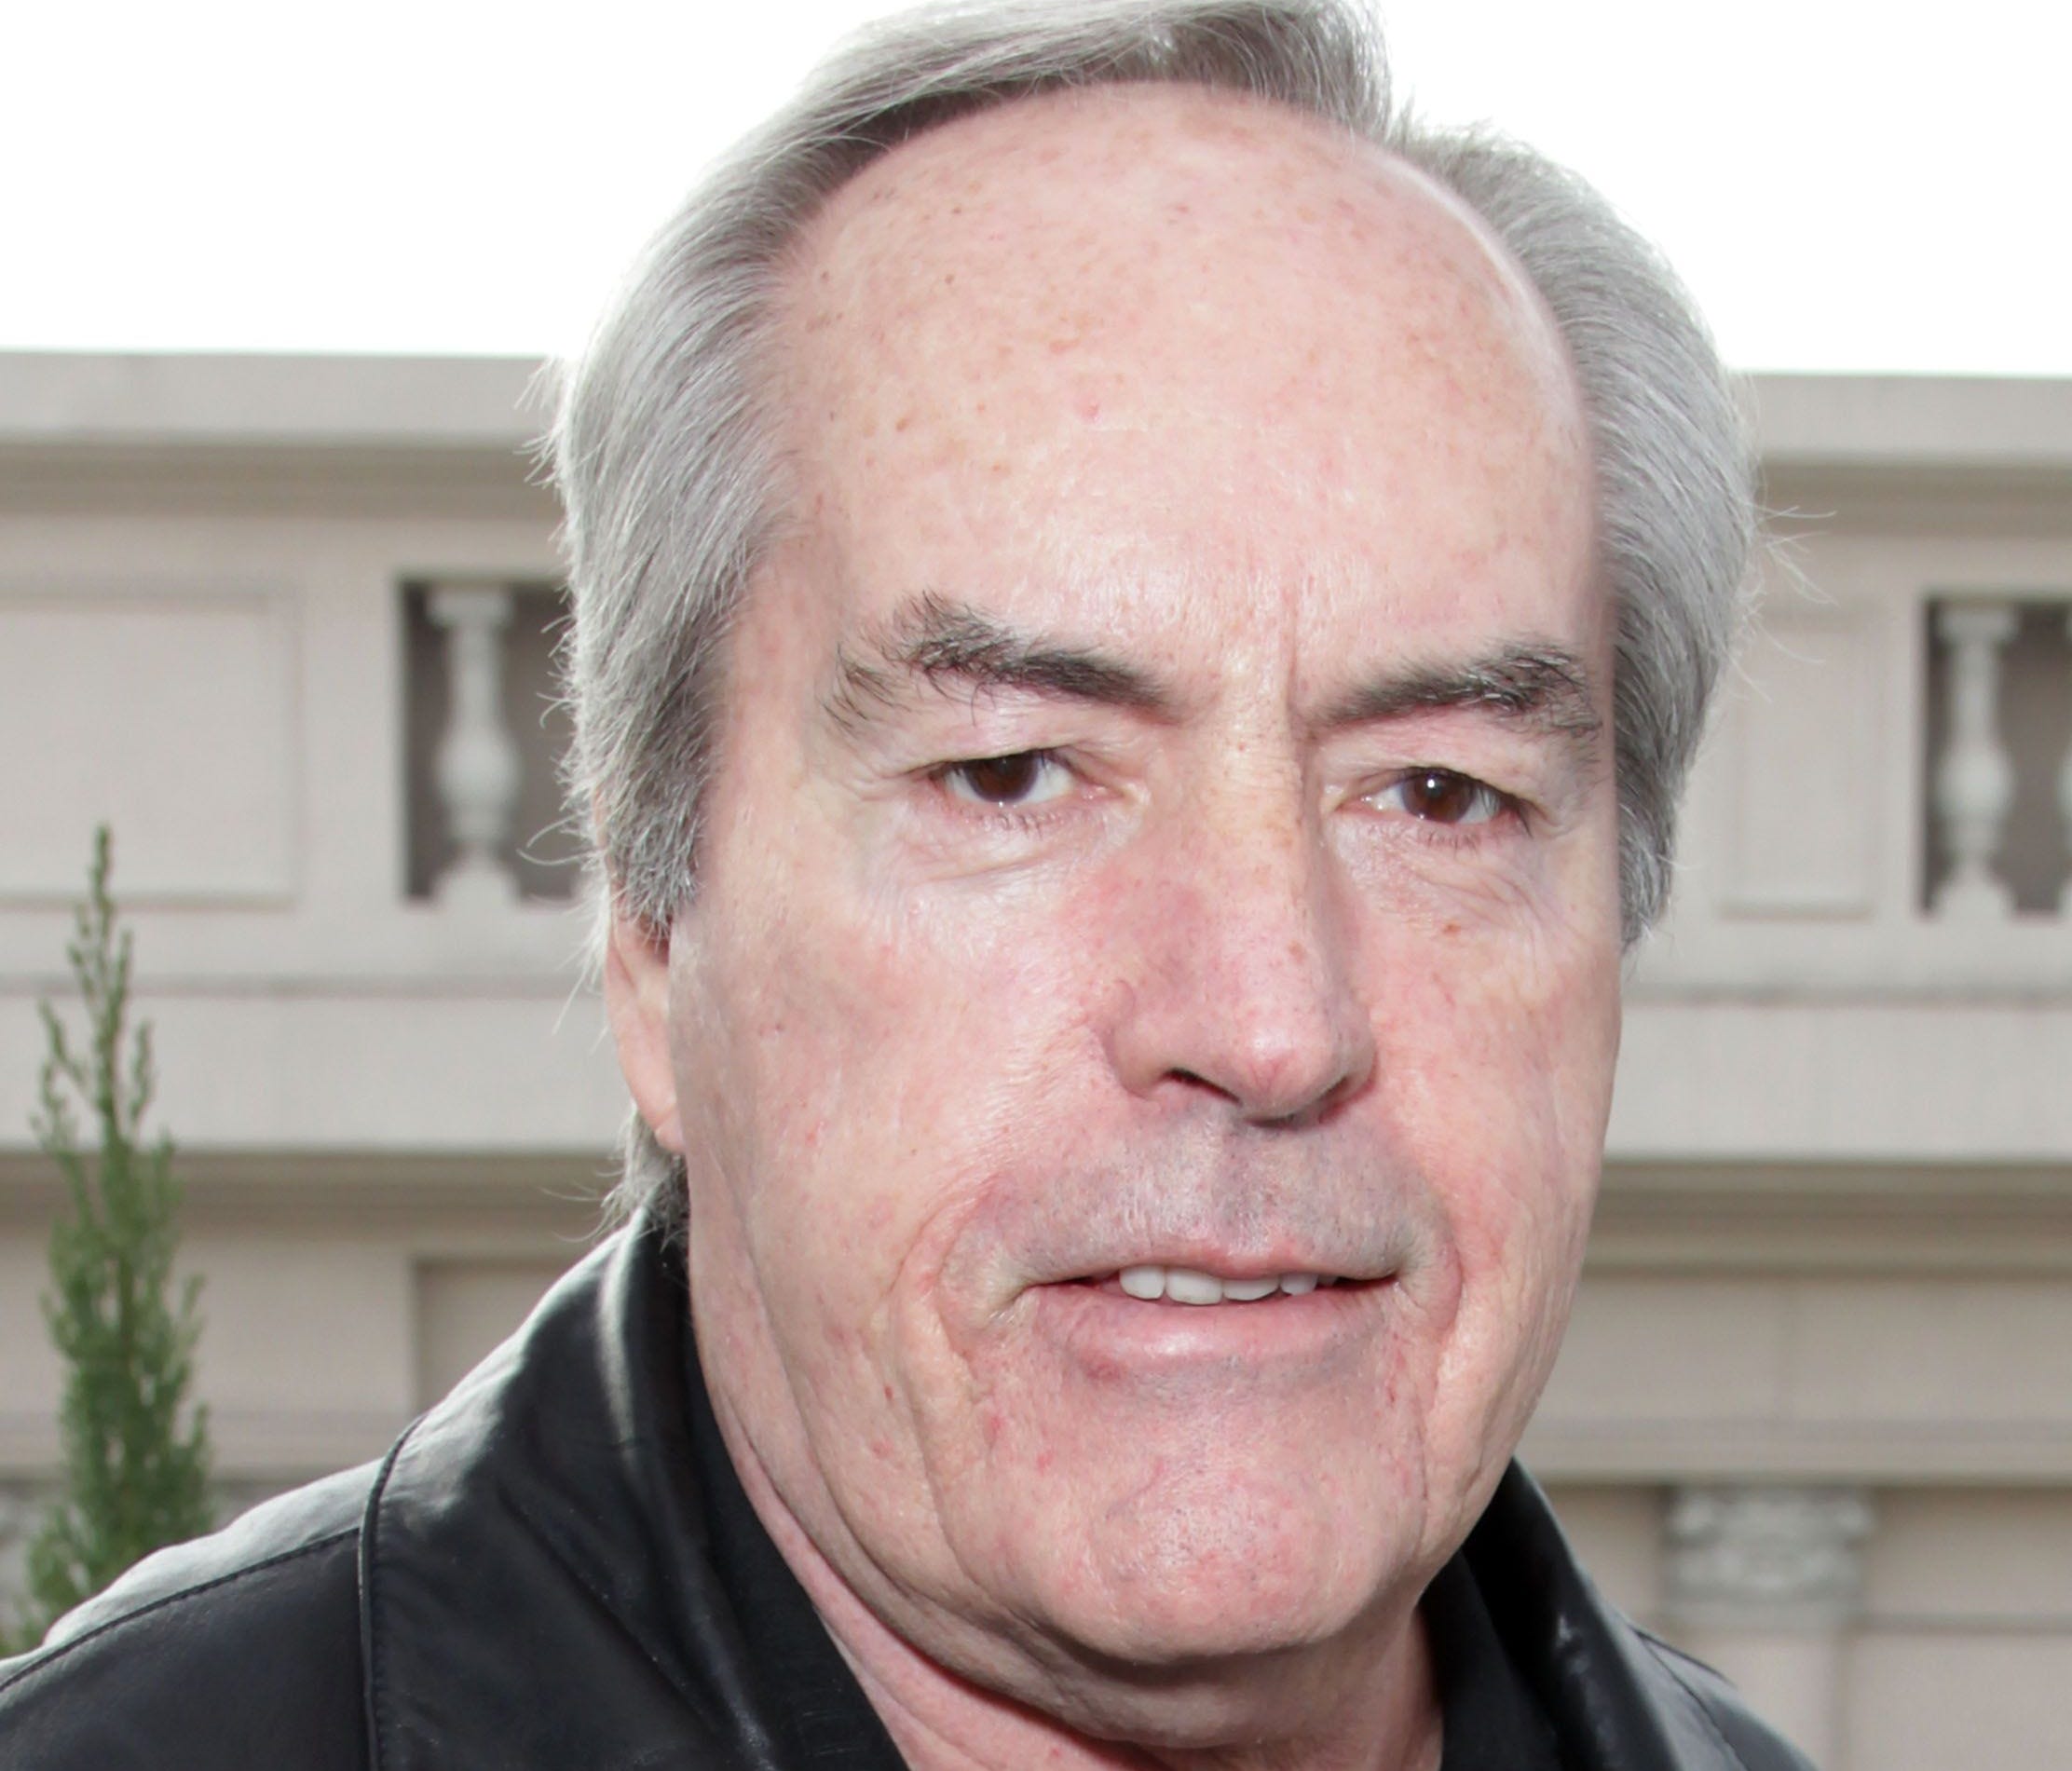 Actor Powers Boothe attends the DPA Pre-Golden Globe Awards Gift Suite at the Luxe Hotel on January 9, 2014 in Beverly Hills, California.